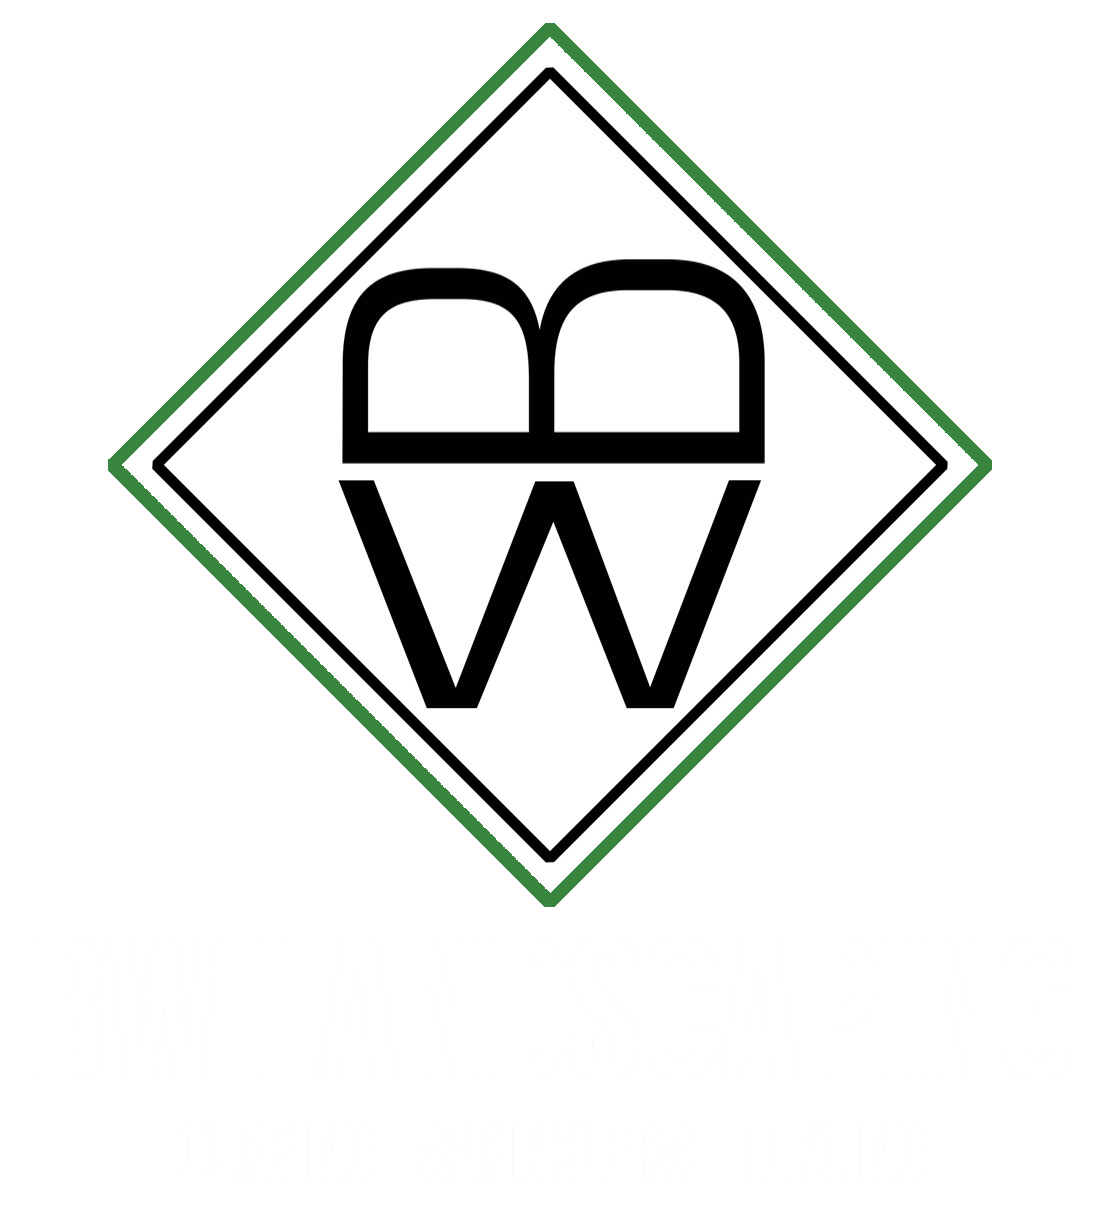 BW Landscaping